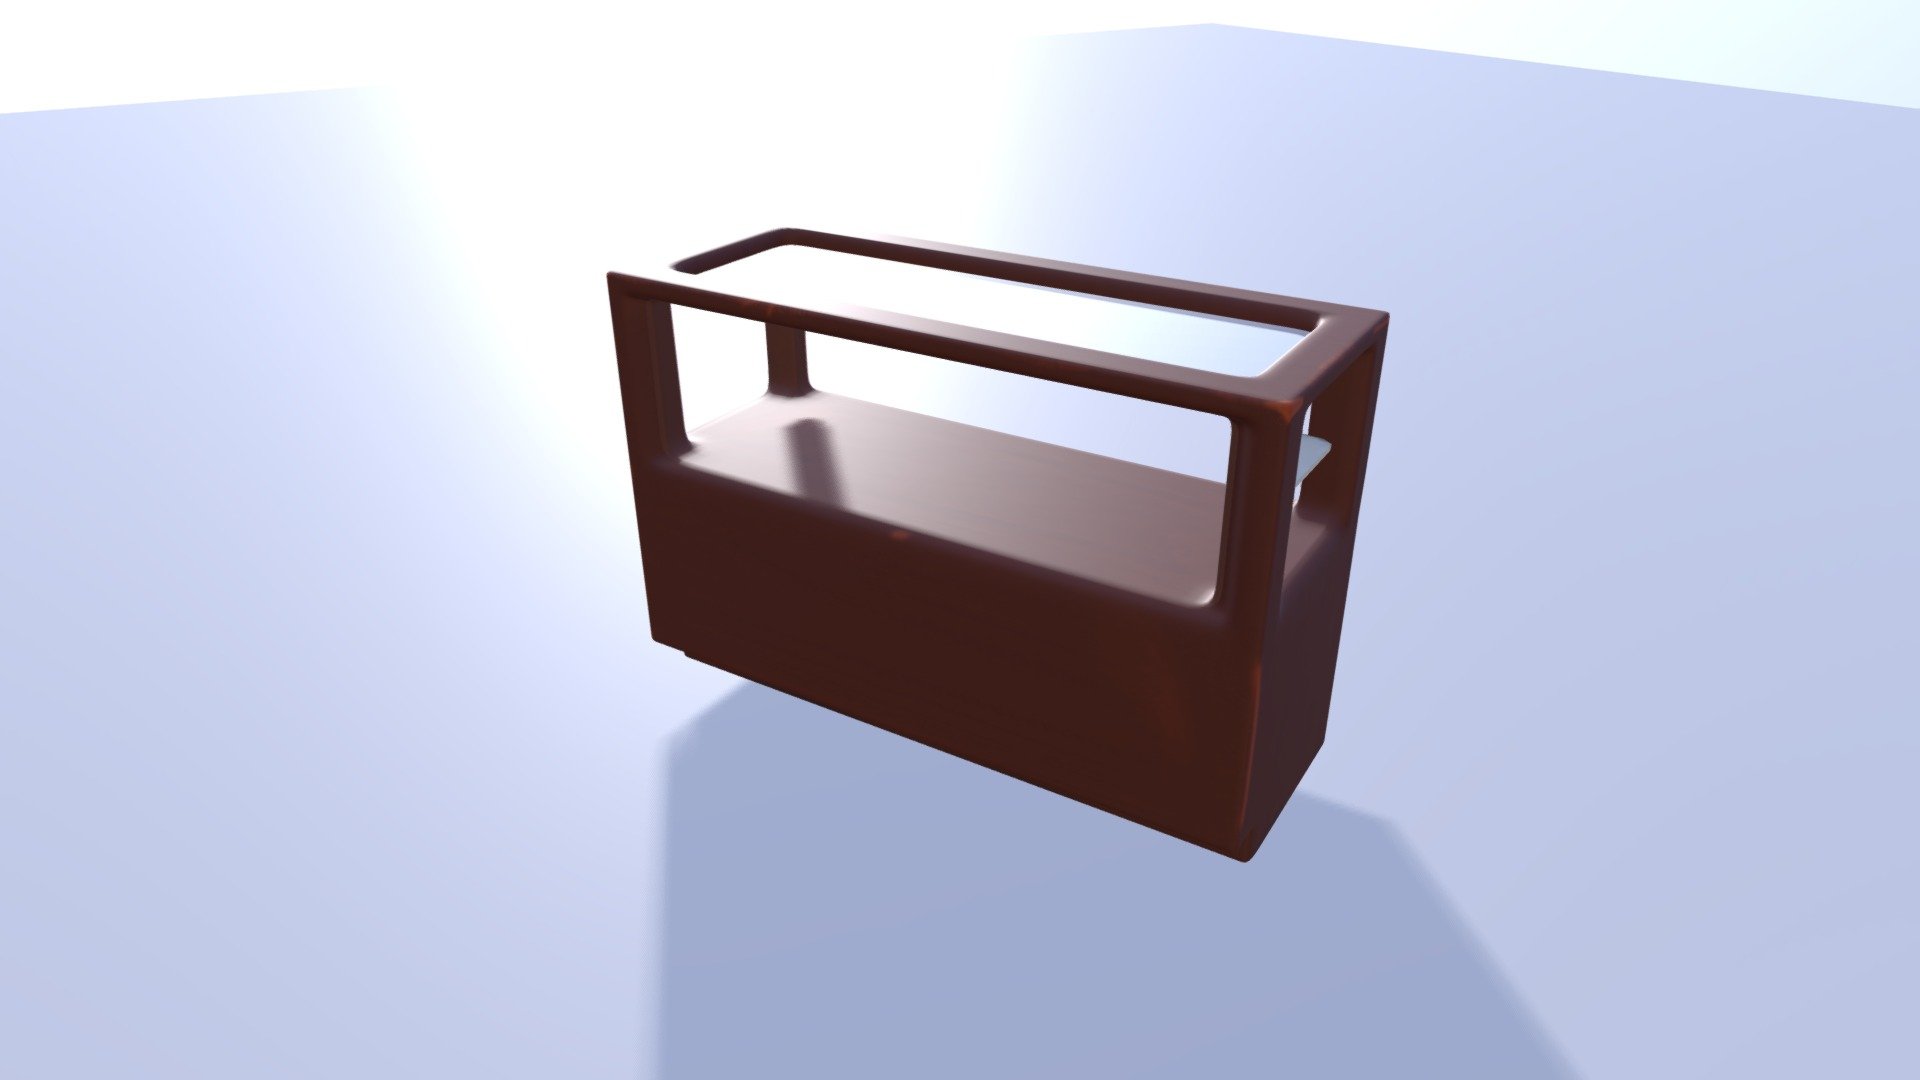 Display Case - Furniture Object